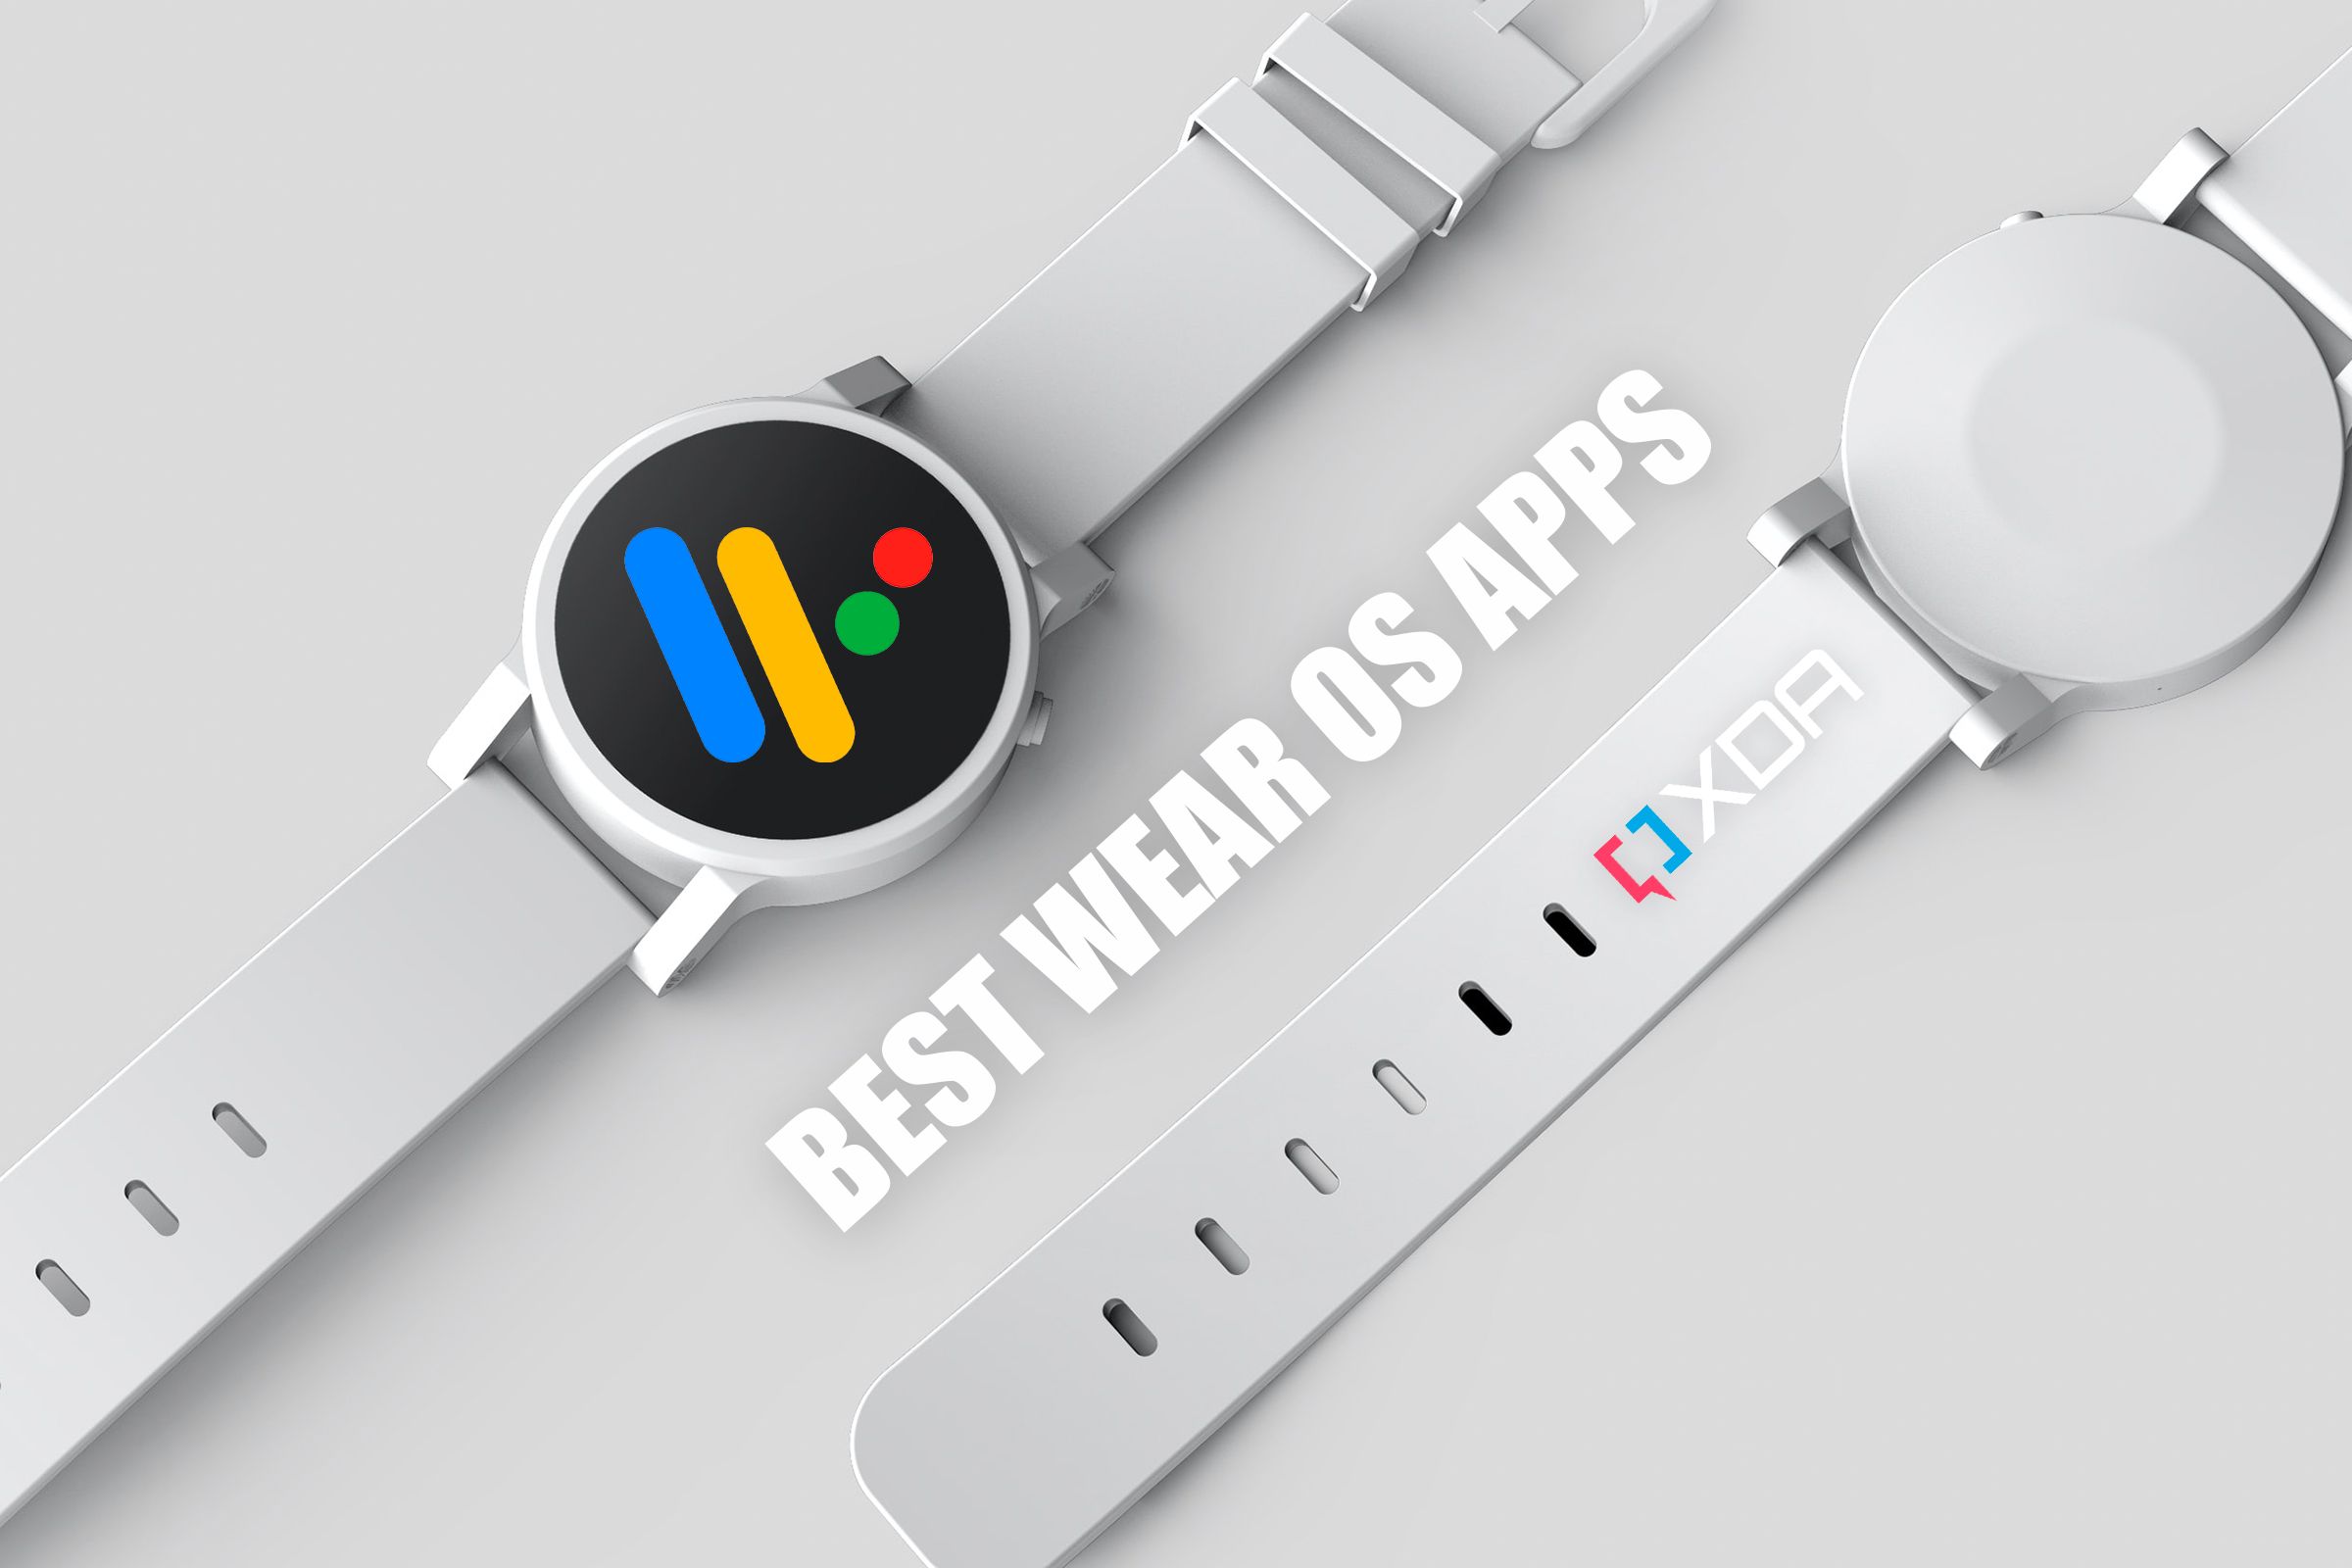 Google Fit app gets revamped while Wear OS improves workouts -   news